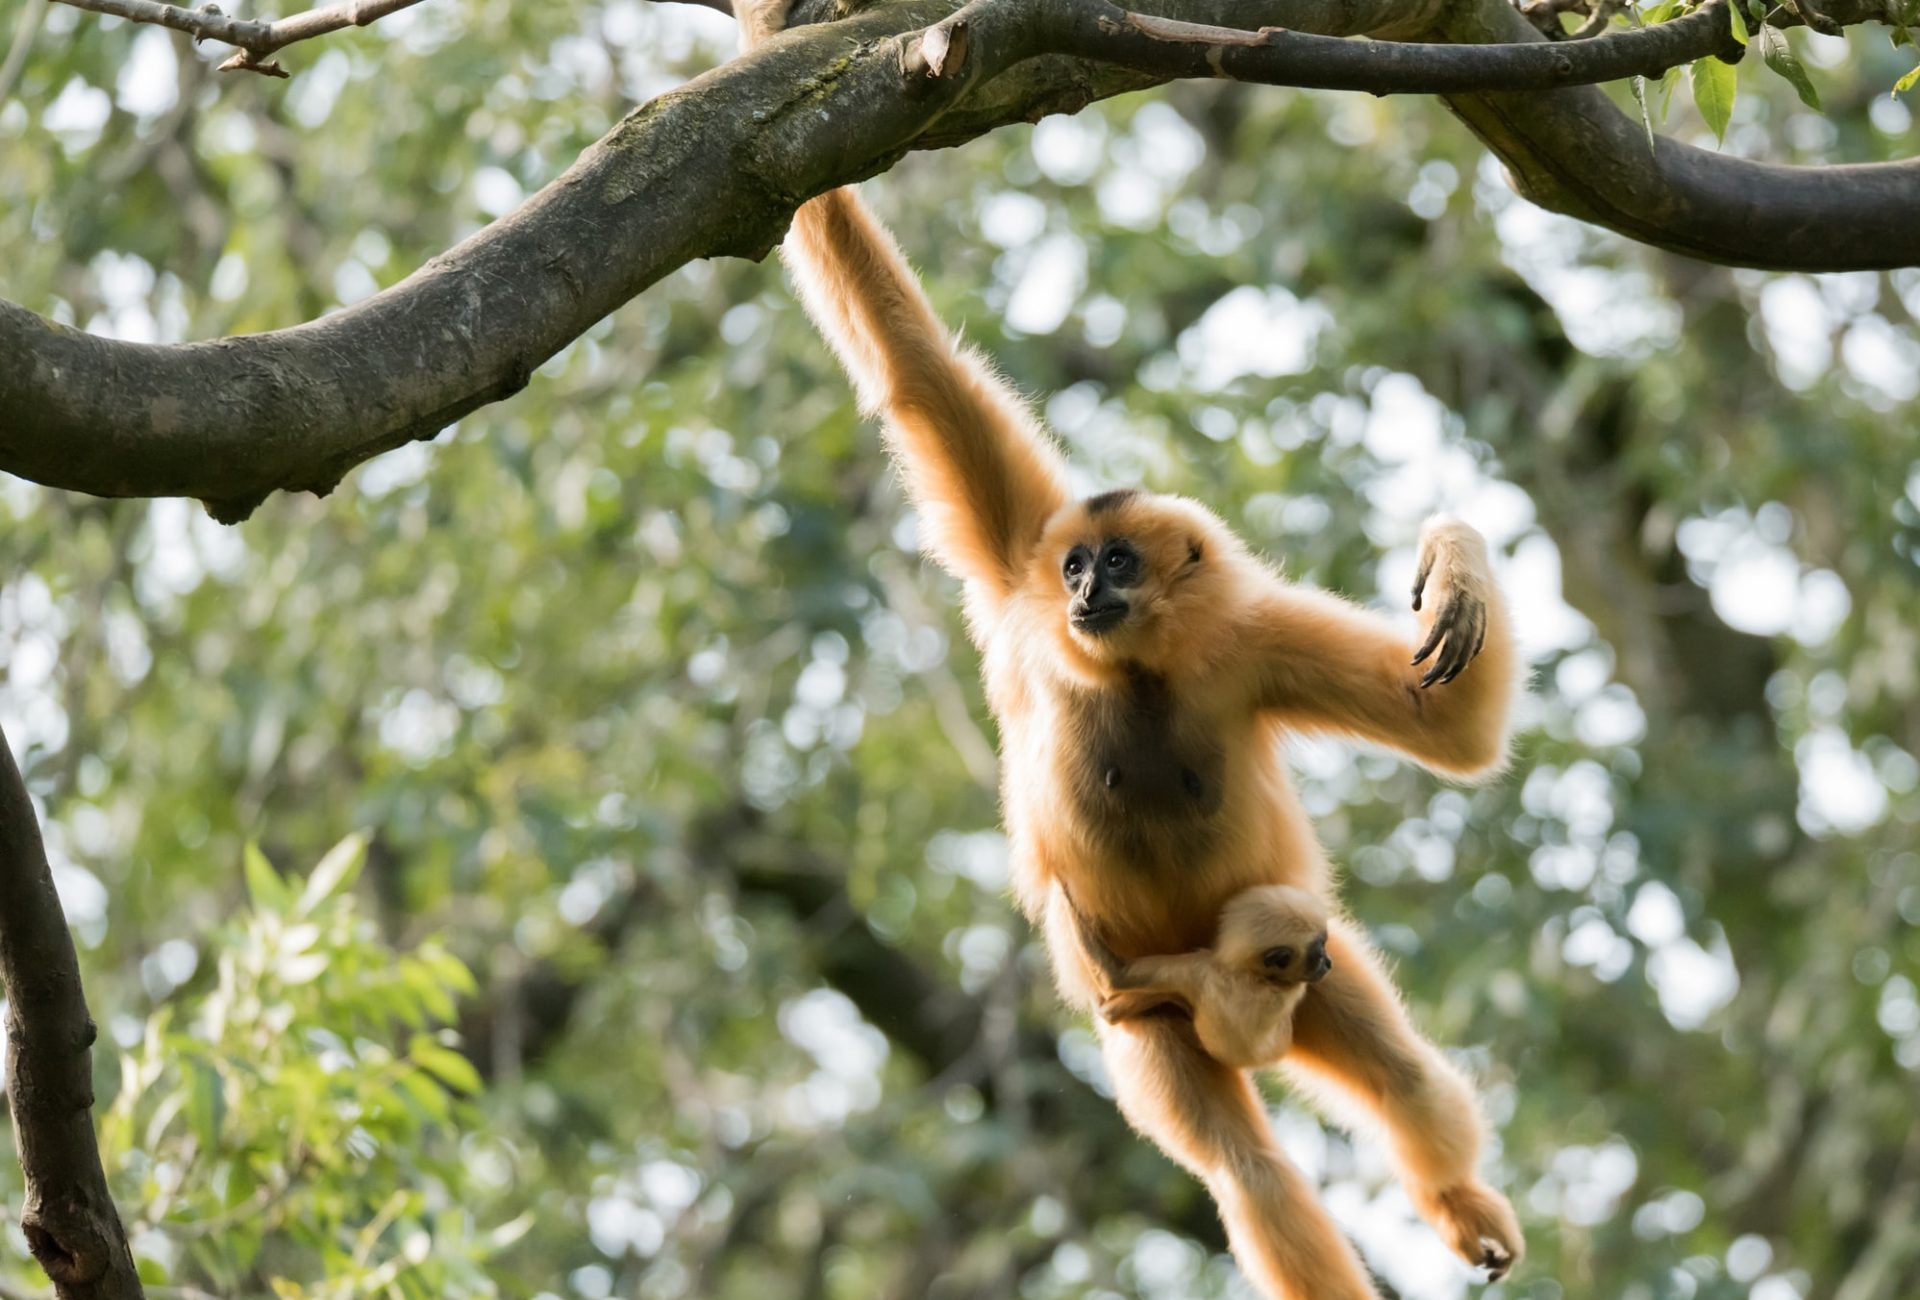 Buff-cheeked gibbon hanging from a tree